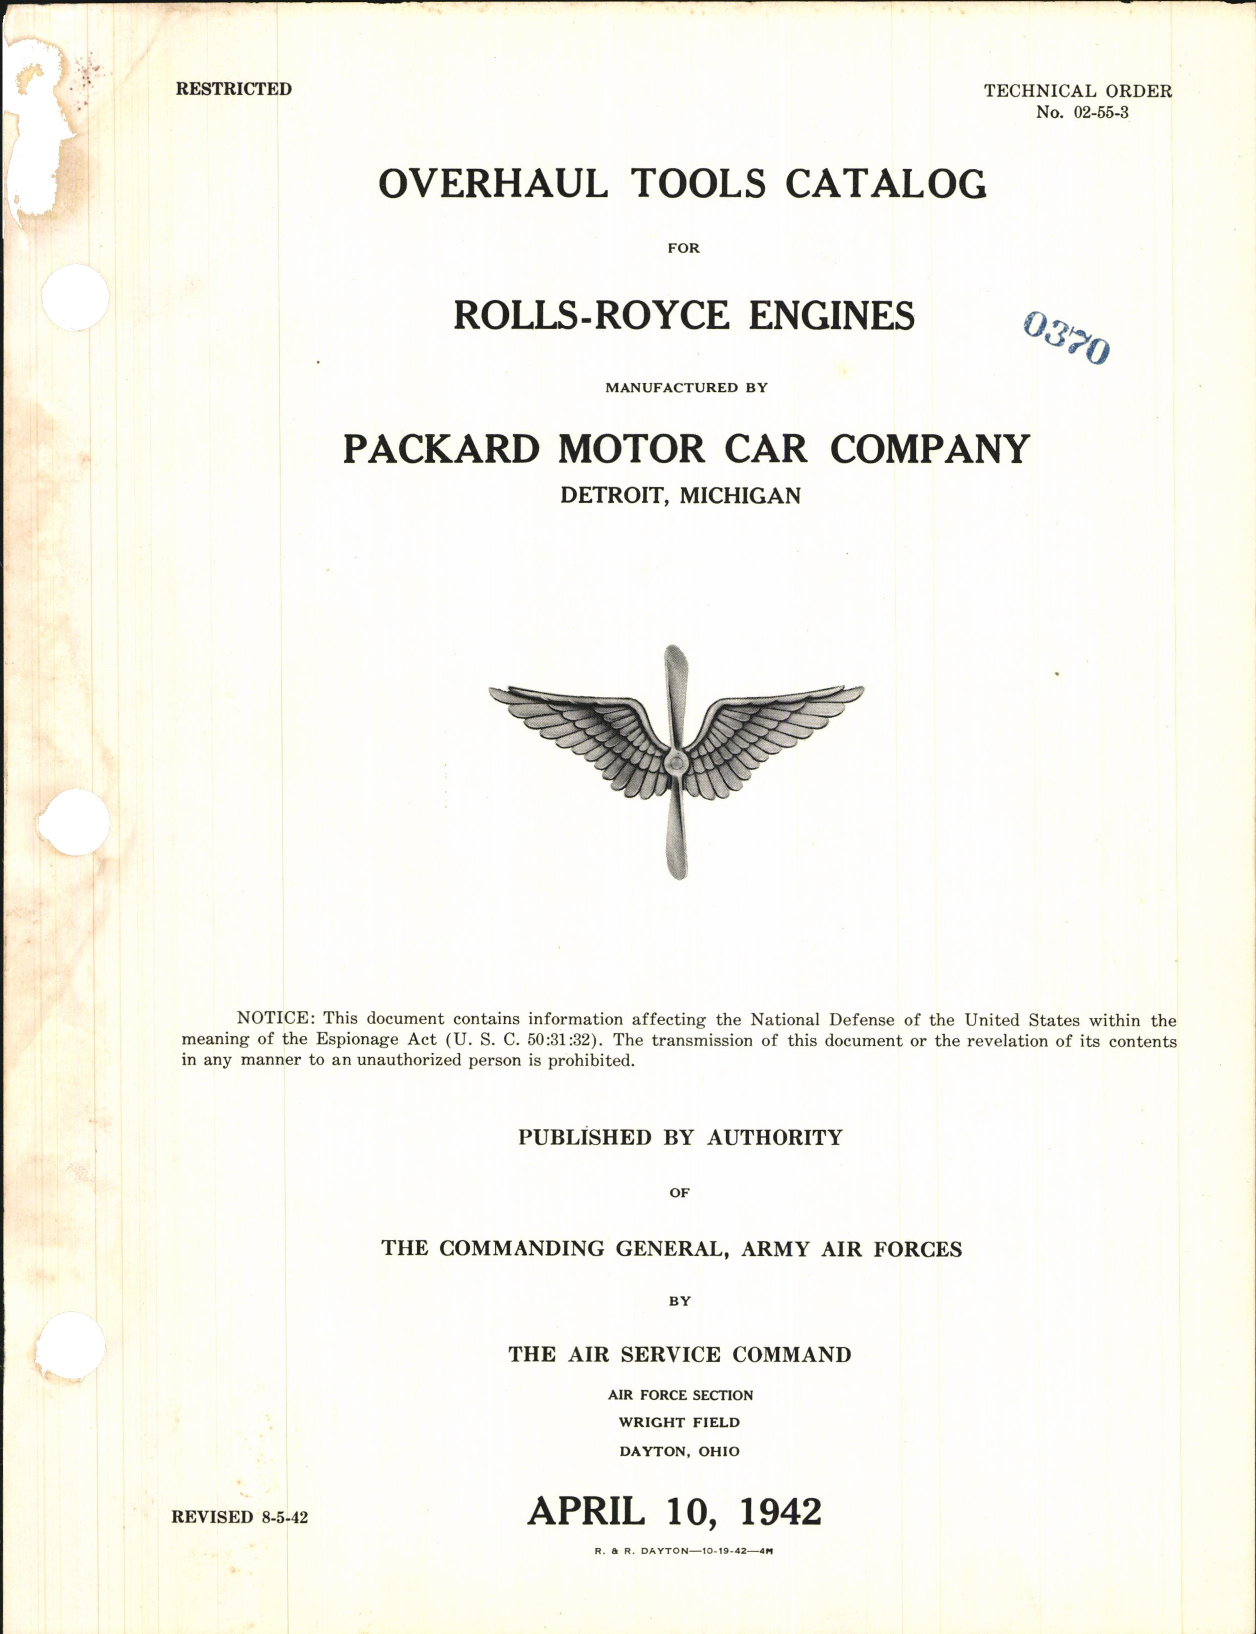 Sample page 1 from AirCorps Library document: Overhaul Tools Catalog for Rolls-Royce Engines